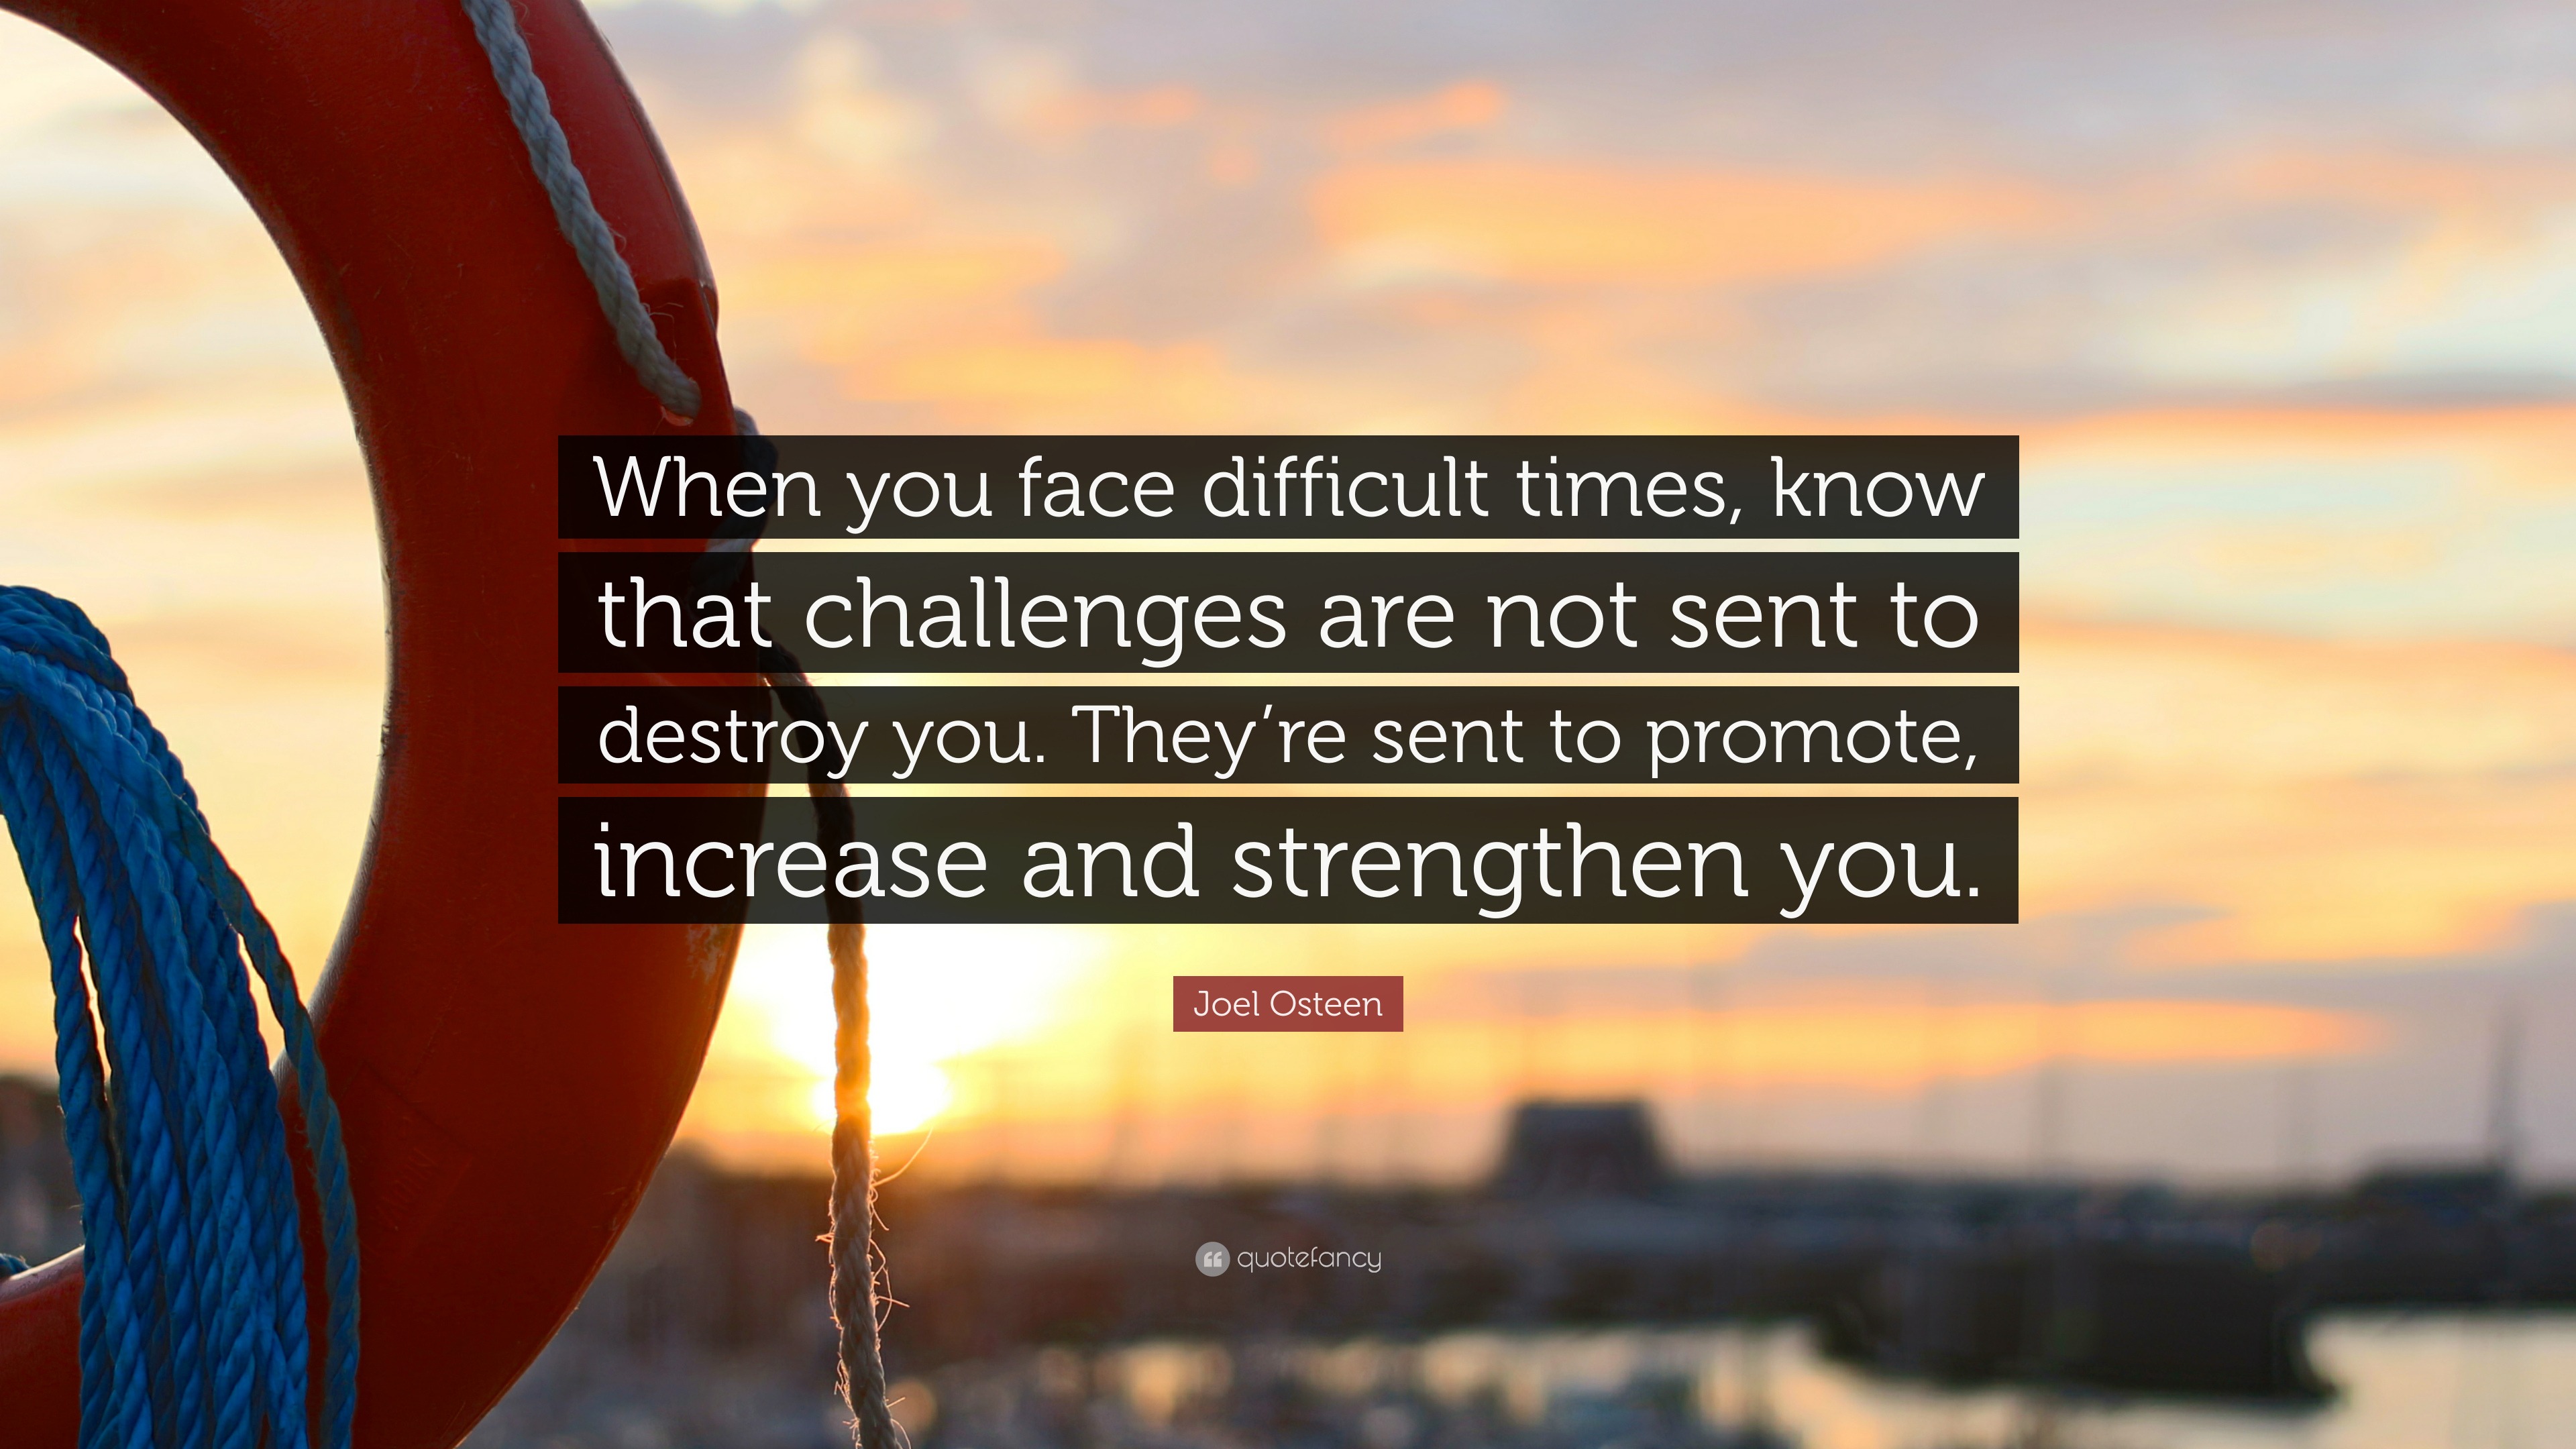 Joel Osteen Quote: “When you face difficult times, know that challenges